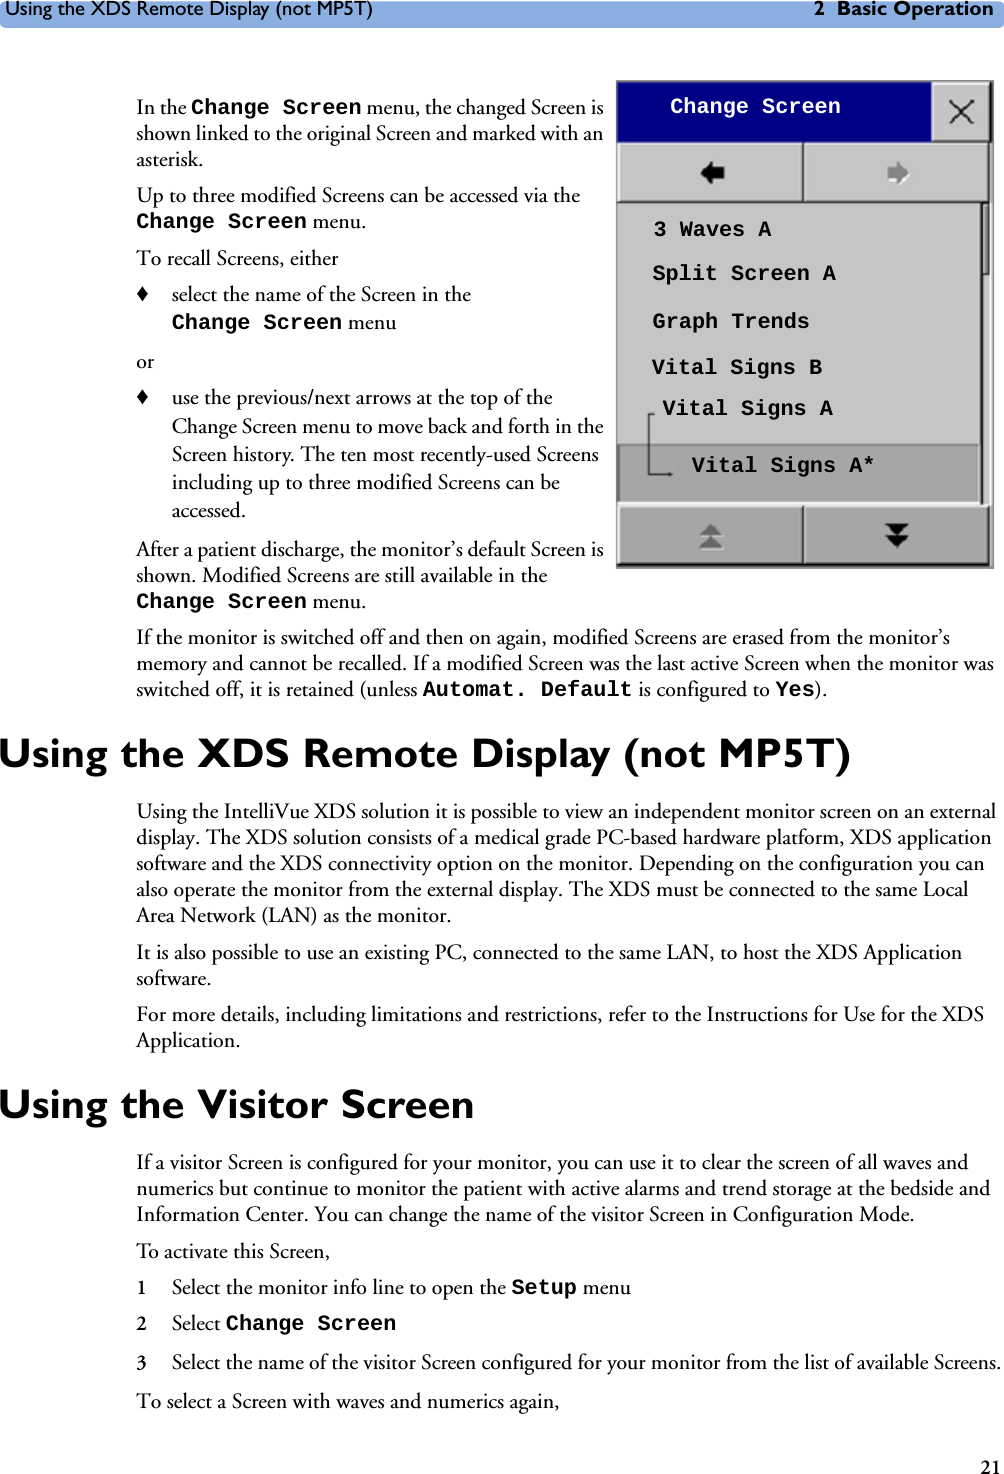 Using the XDS Remote Display (not MP5T) 2 Basic Operation21In the Change Screen menu, the changed Screen is shown linked to the original Screen and marked with an asterisk. Up to three modified Screens can be accessed via the Change Screen menu. To recall Screens, either♦select the name of the Screen in the Change Screen menuor♦use the previous/next arrows at the top of the Change Screen menu to move back and forth in the Screen history. The ten most recently-used Screens including up to three modified Screens can be accessed. After a patient discharge, the monitor’s default Screen is shown. Modified Screens are still available in the Change Screen menu. If the monitor is switched off and then on again, modified Screens are erased from the monitor’s memory and cannot be recalled. If a modified Screen was the last active Screen when the monitor was switched off, it is retained (unless Automat. Default is configured to Yes). Using the XDS Remote Display (not MP5T)Using the IntelliVue XDS solution it is possible to view an independent monitor screen on an external display. The XDS solution consists of a medical grade PC-based hardware platform, XDS application software and the XDS connectivity option on the monitor. Depending on the configuration you can also operate the monitor from the external display. The XDS must be connected to the same Local Area Network (LAN) as the monitor. It is also possible to use an existing PC, connected to the same LAN, to host the XDS Application software.For more details, including limitations and restrictions, refer to the Instructions for Use for the XDS Application. Using the Visitor ScreenIf a visitor Screen is configured for your monitor, you can use it to clear the screen of all waves and numerics but continue to monitor the patient with active alarms and trend storage at the bedside and Information Center. You can change the name of the visitor Screen in Configuration Mode.To activate this Screen,1Select the monitor info line to open the Setup menu 2Select Change Screen 3Select the name of the visitor Screen configured for your monitor from the list of available Screens.To select a Screen with waves and numerics again,Change Screen3 Waves ASplit Screen AGraph TrendsVital Signs BVital Signs AVital Signs A*